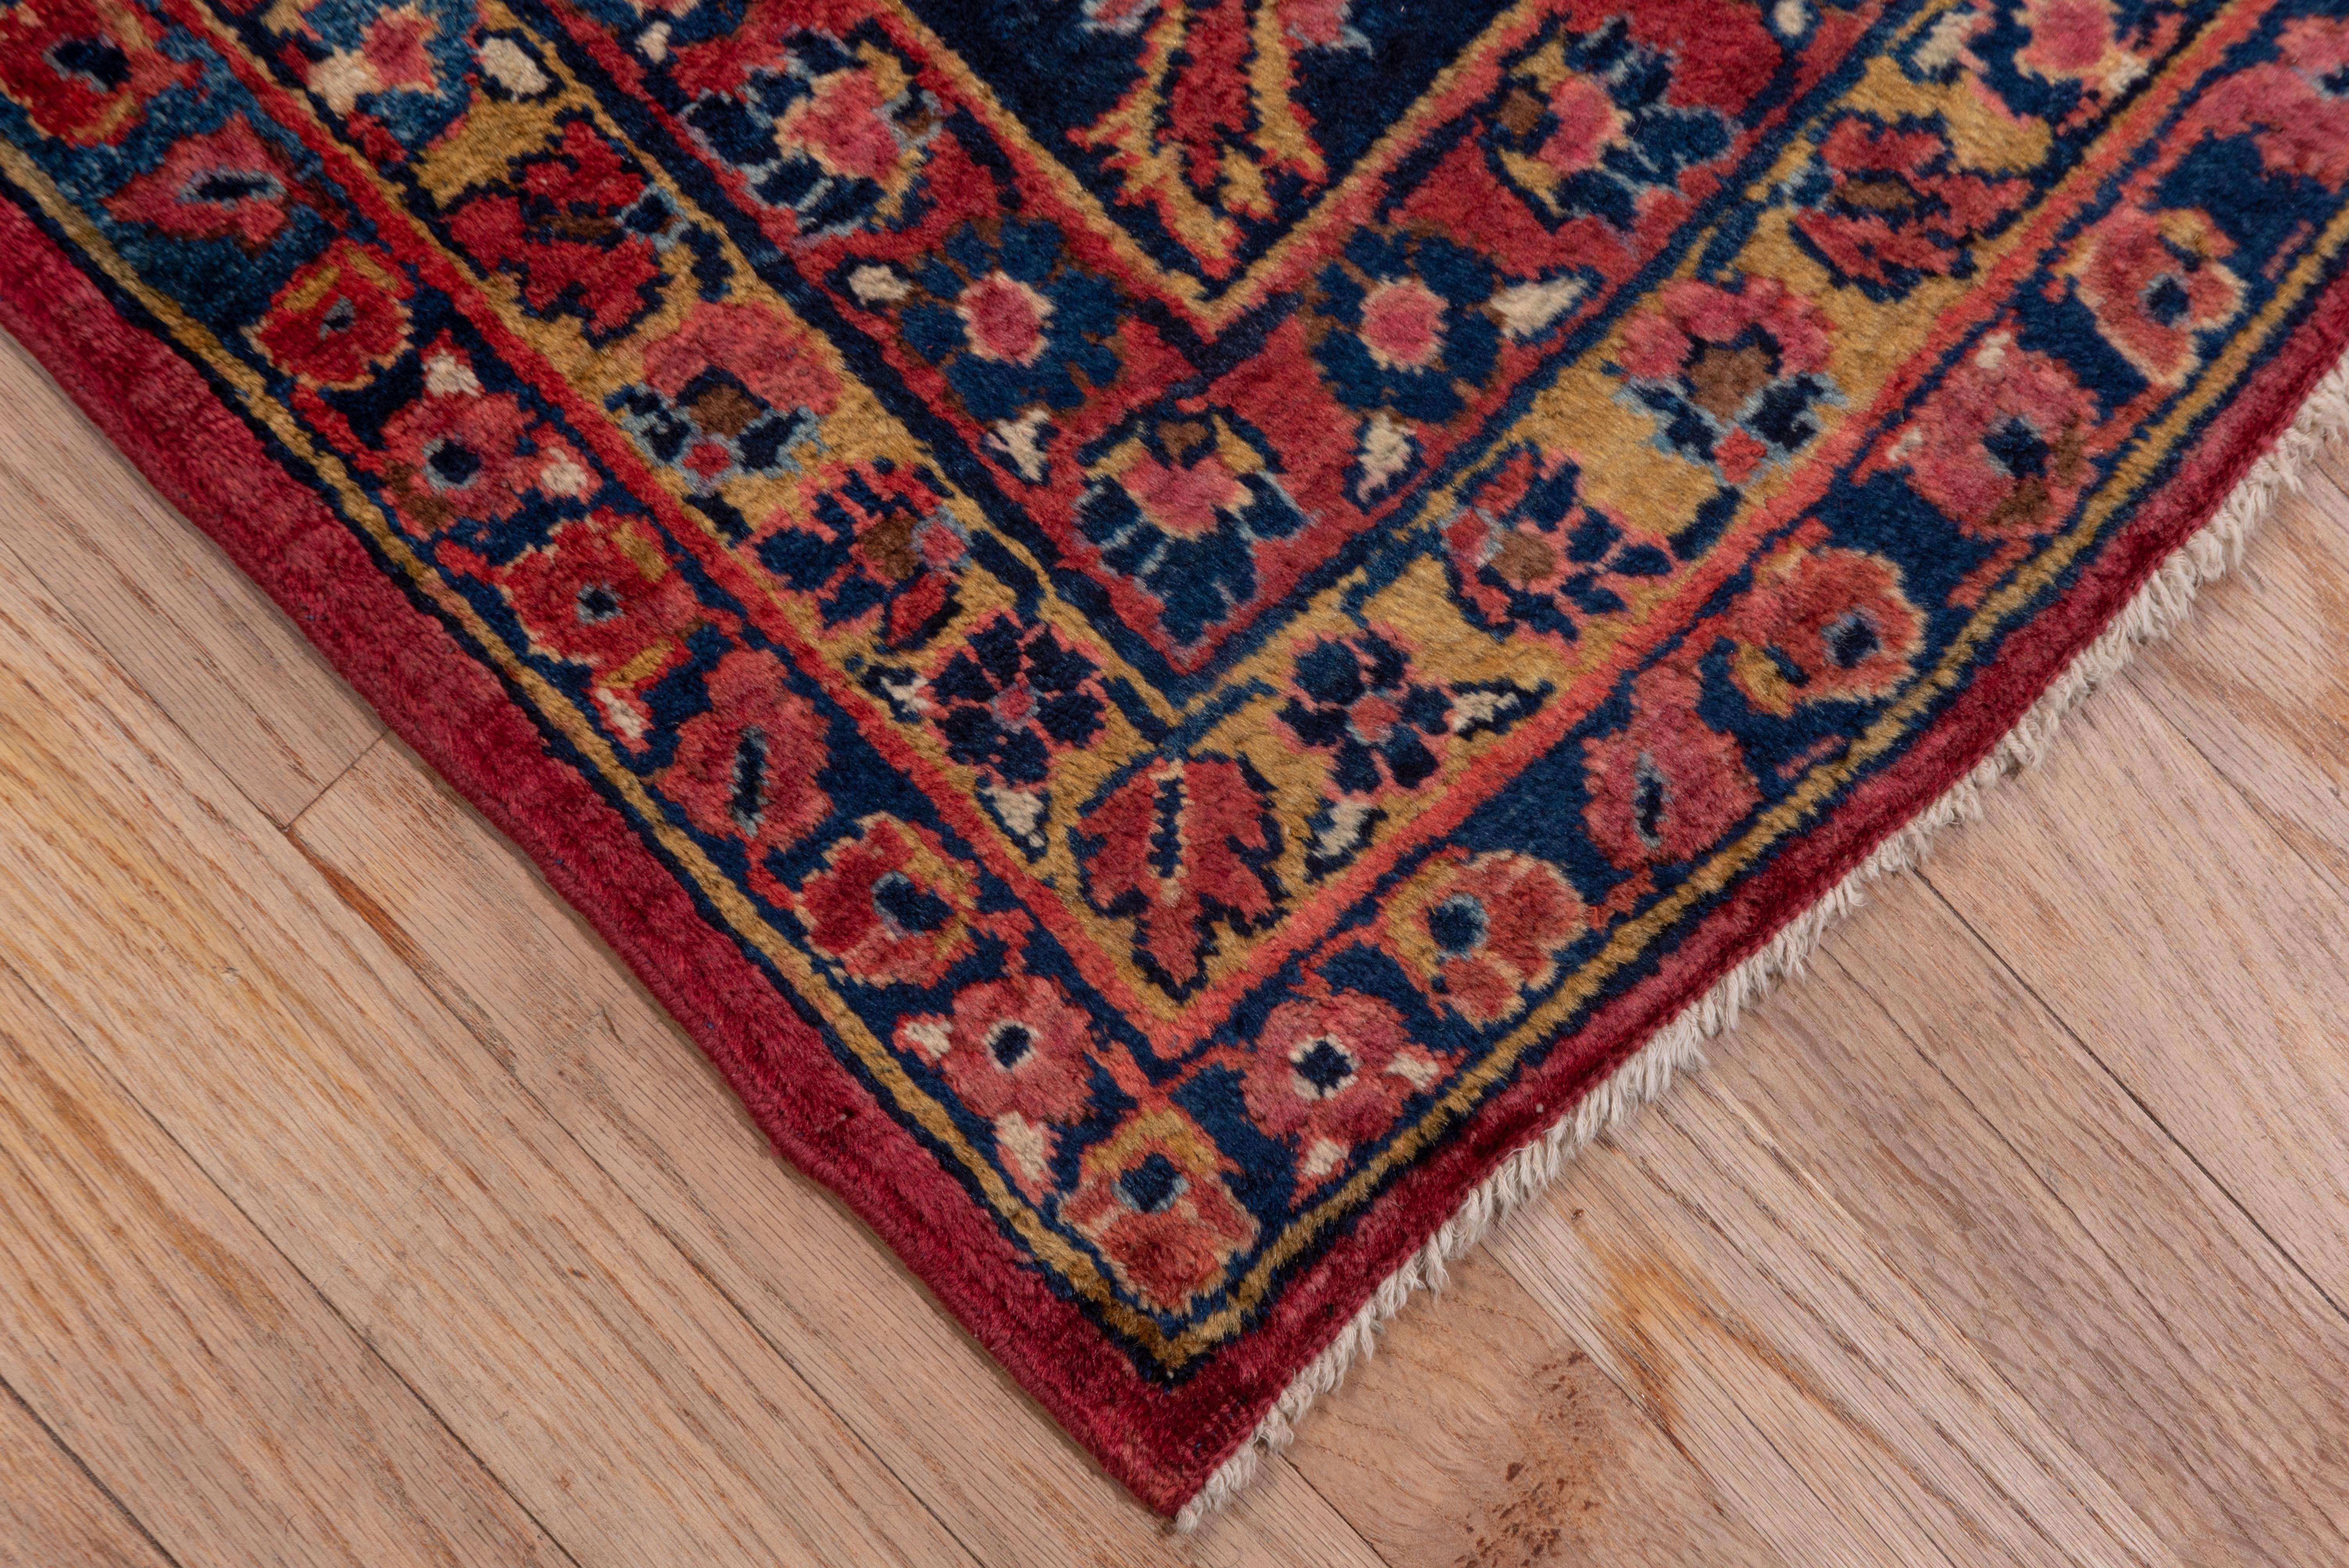 Antique Persian Sarouk Rug, Bright Red Field, Gold and Blue Accents, Medium Pile For Sale 1